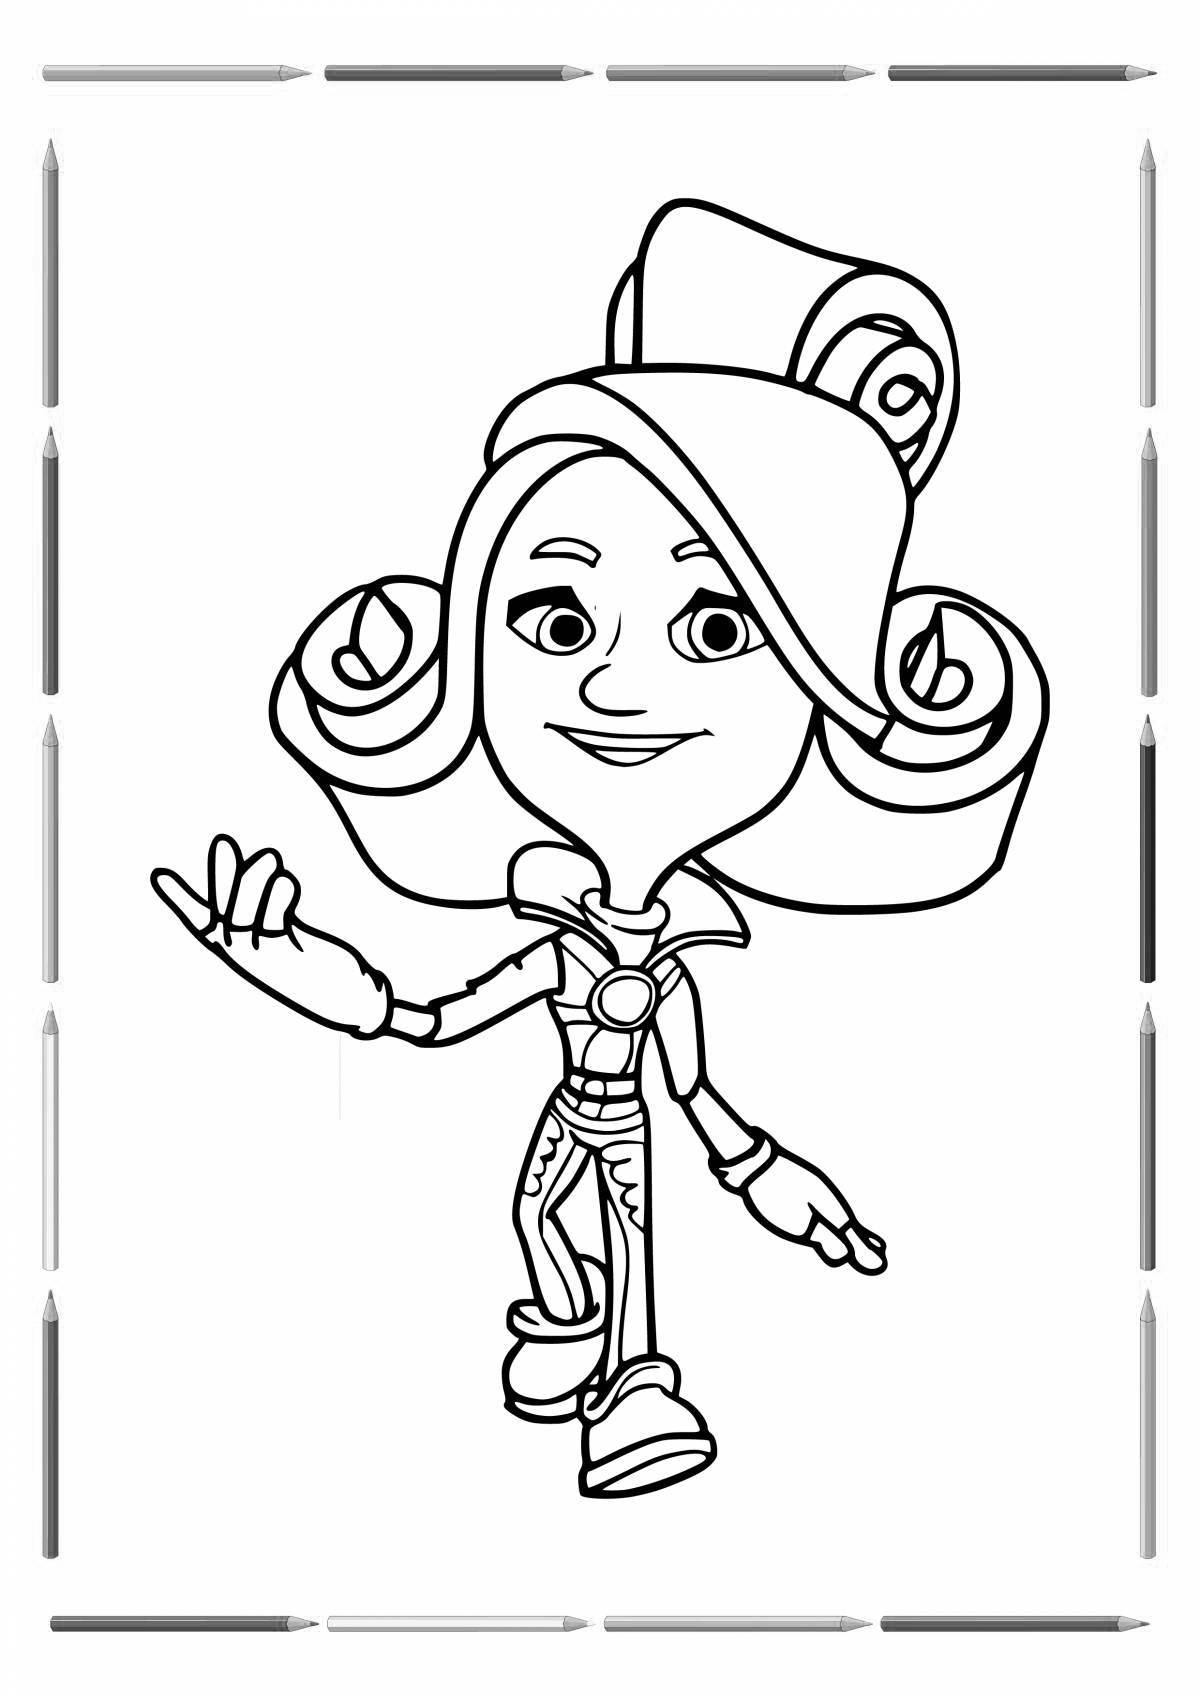 Bright fixies coloring pages for girls